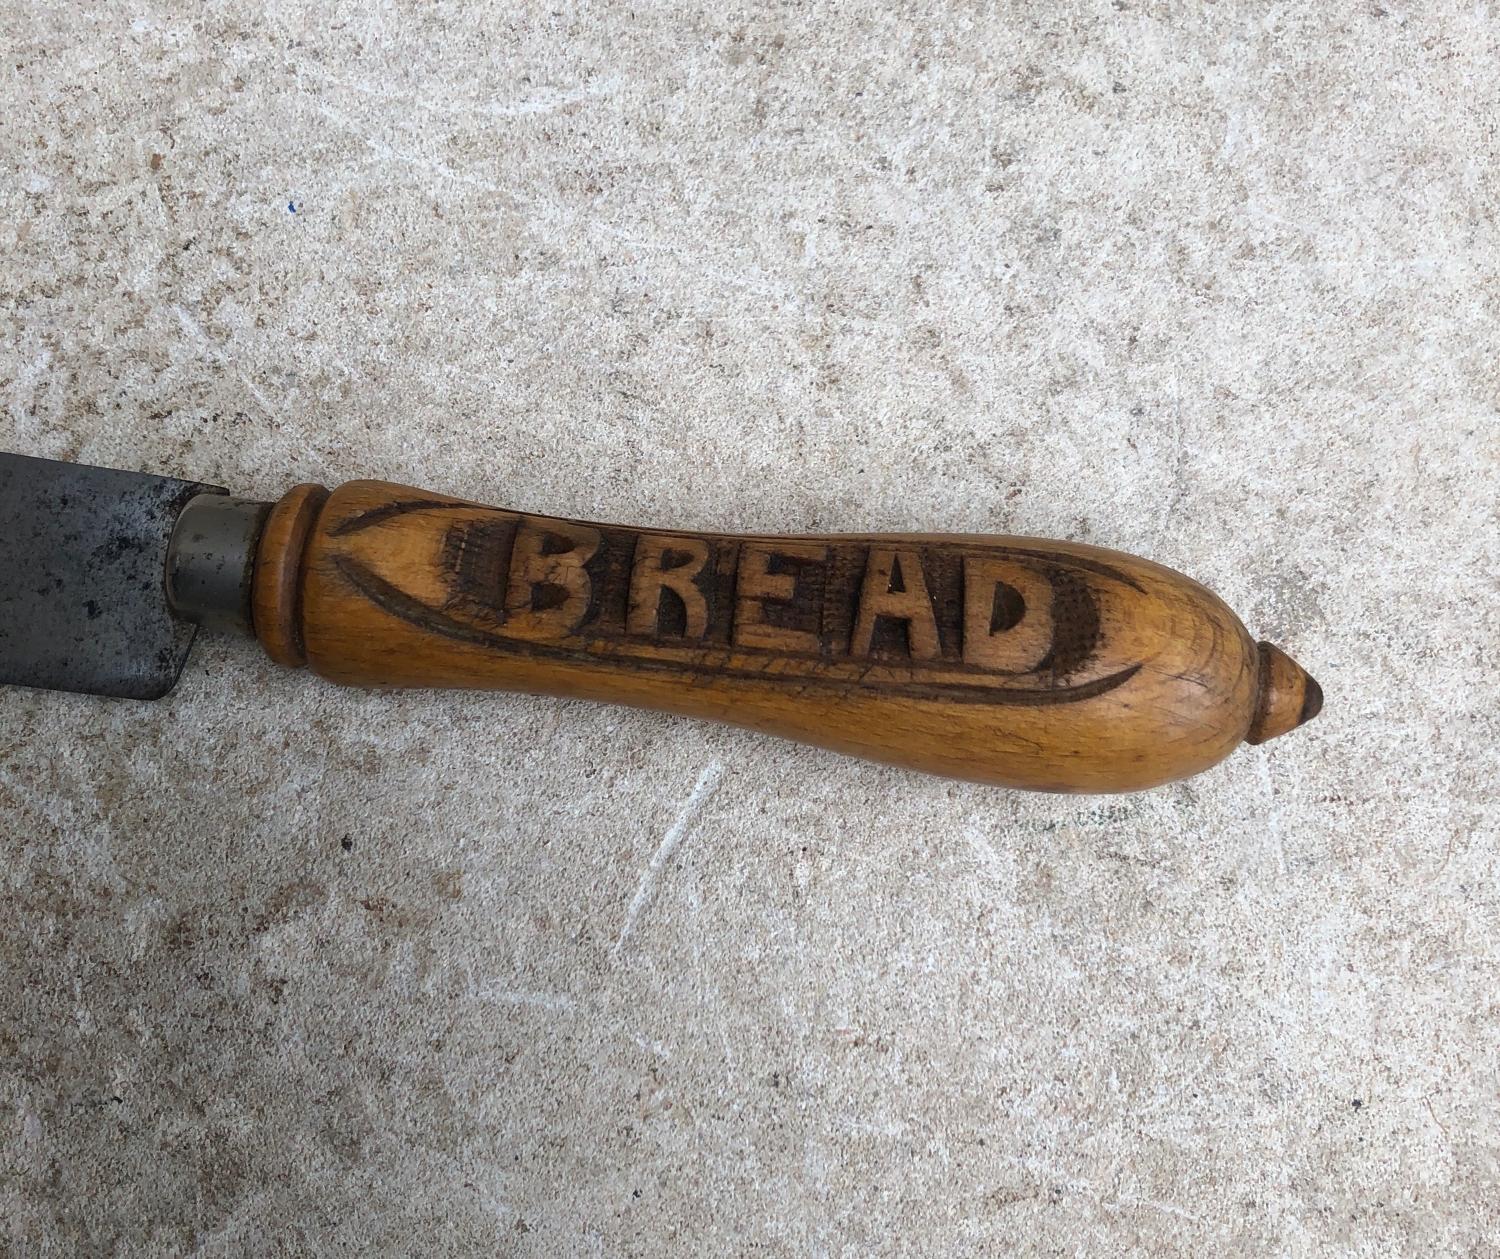 Early 20thC Bread Knife with Hand Carved Handle & Serrated Blade